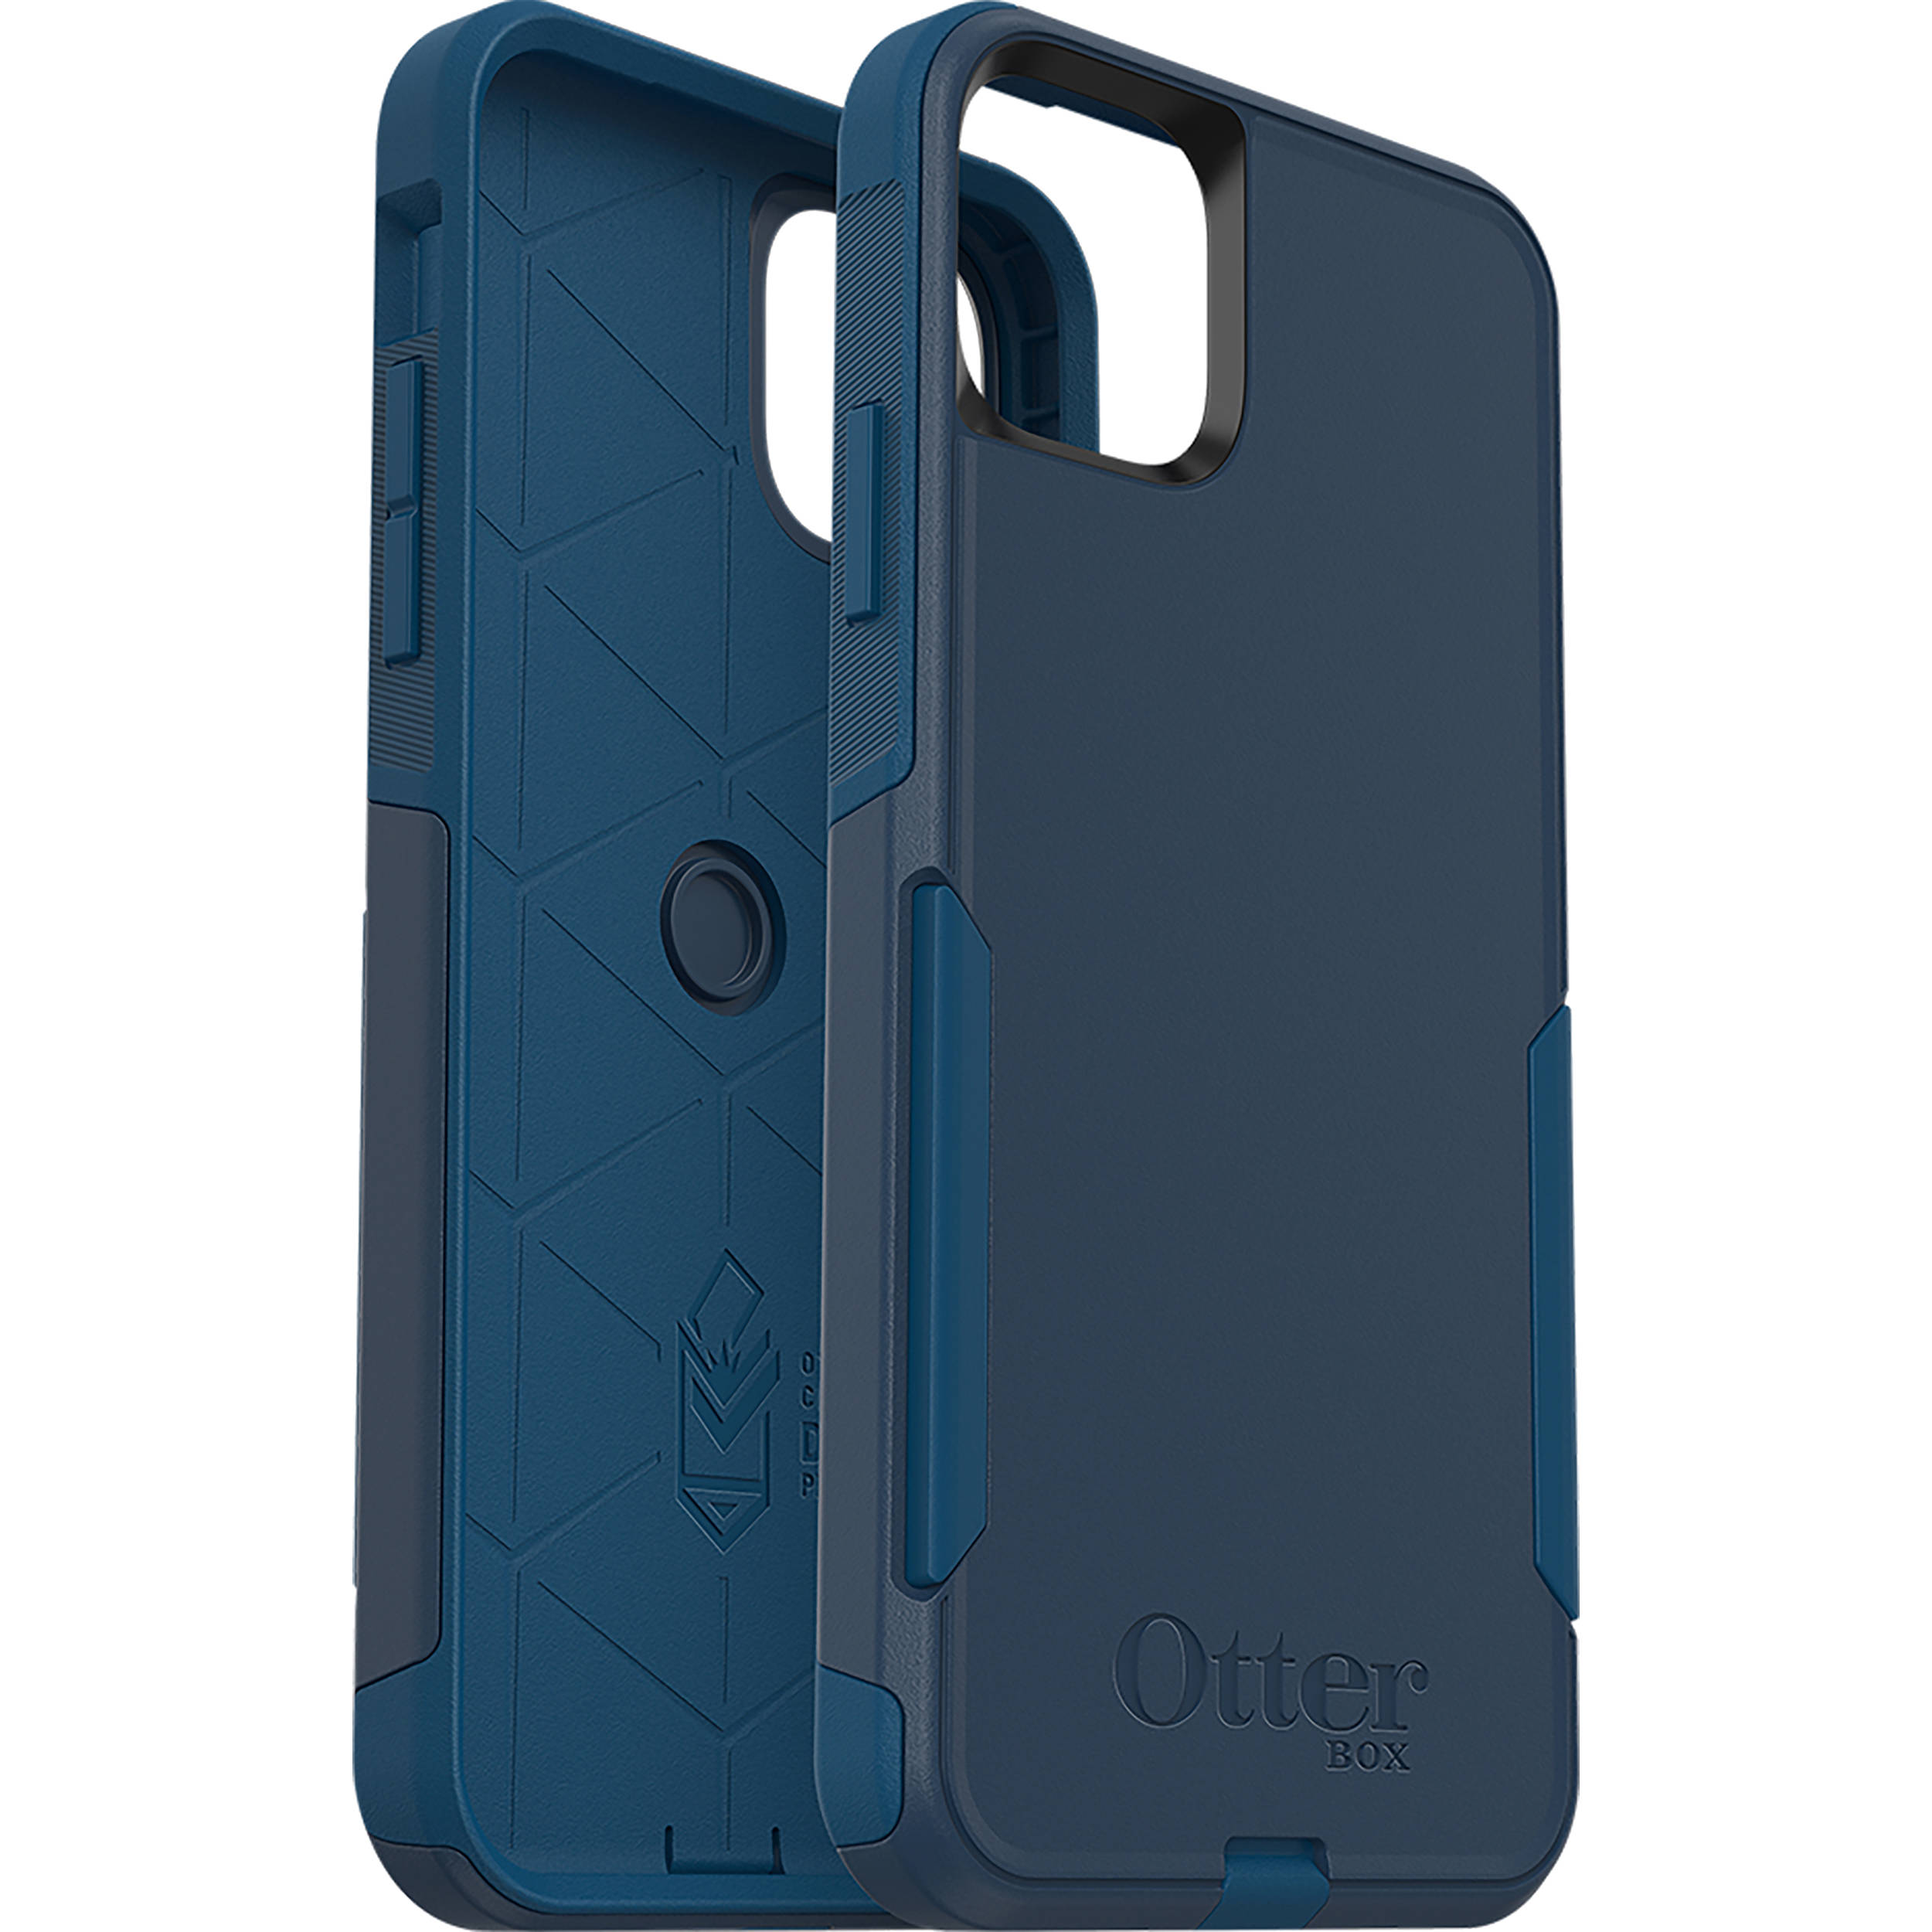 Otterbox Commuter Series Case For Iphone 11 Pro Max 77 62588 B H